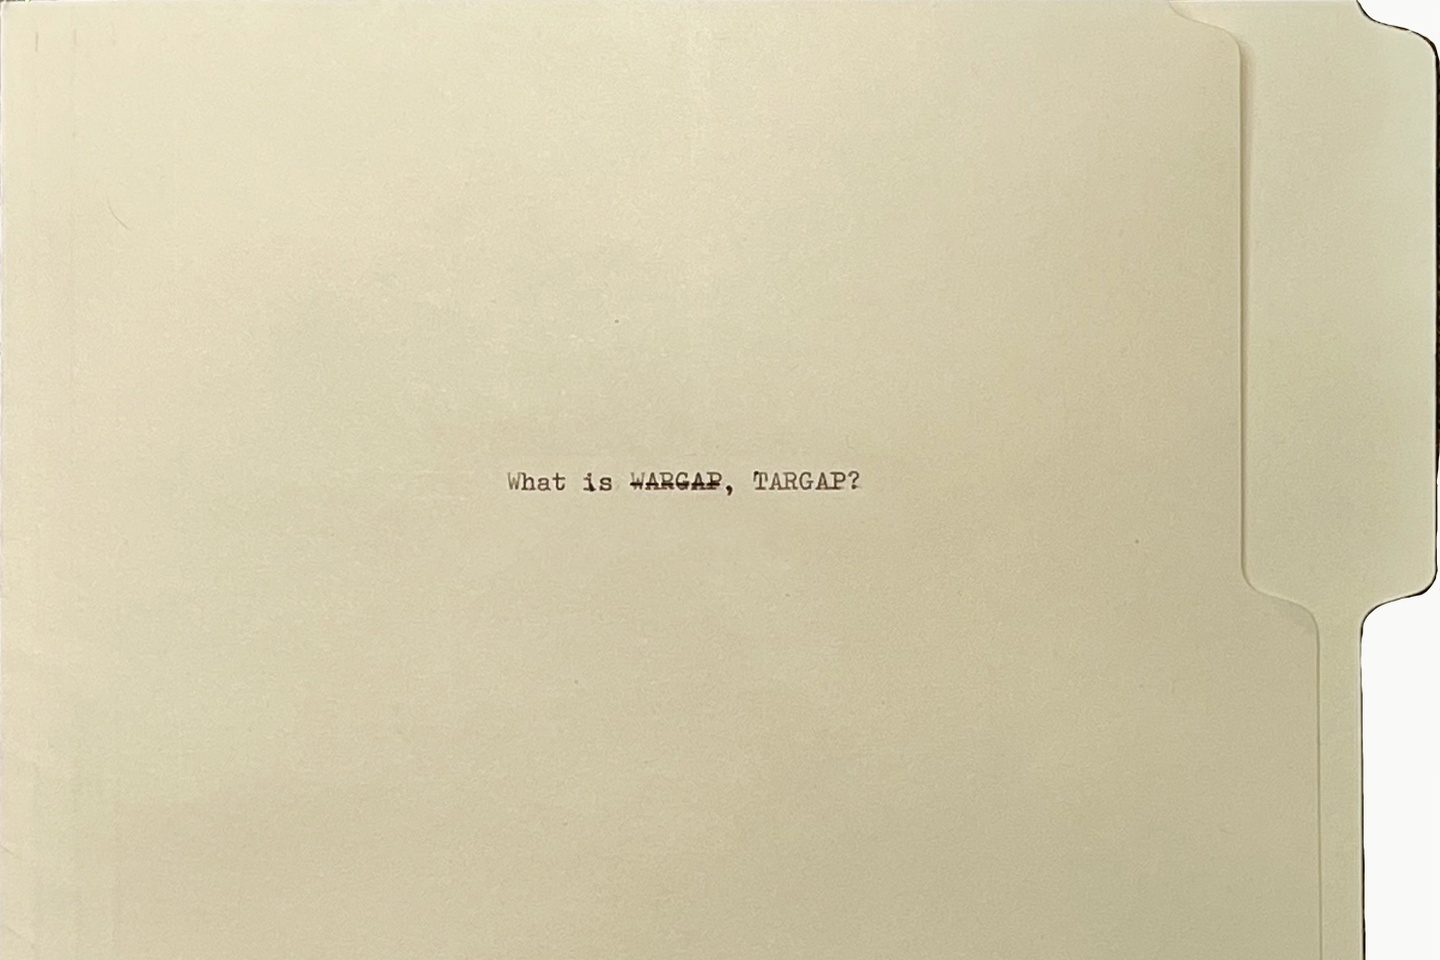 A manila folder on its side, with small, typewriter-written text that says "What is WARGAP, TARGAP?" The word WARGRAP is set in strikethrough type.